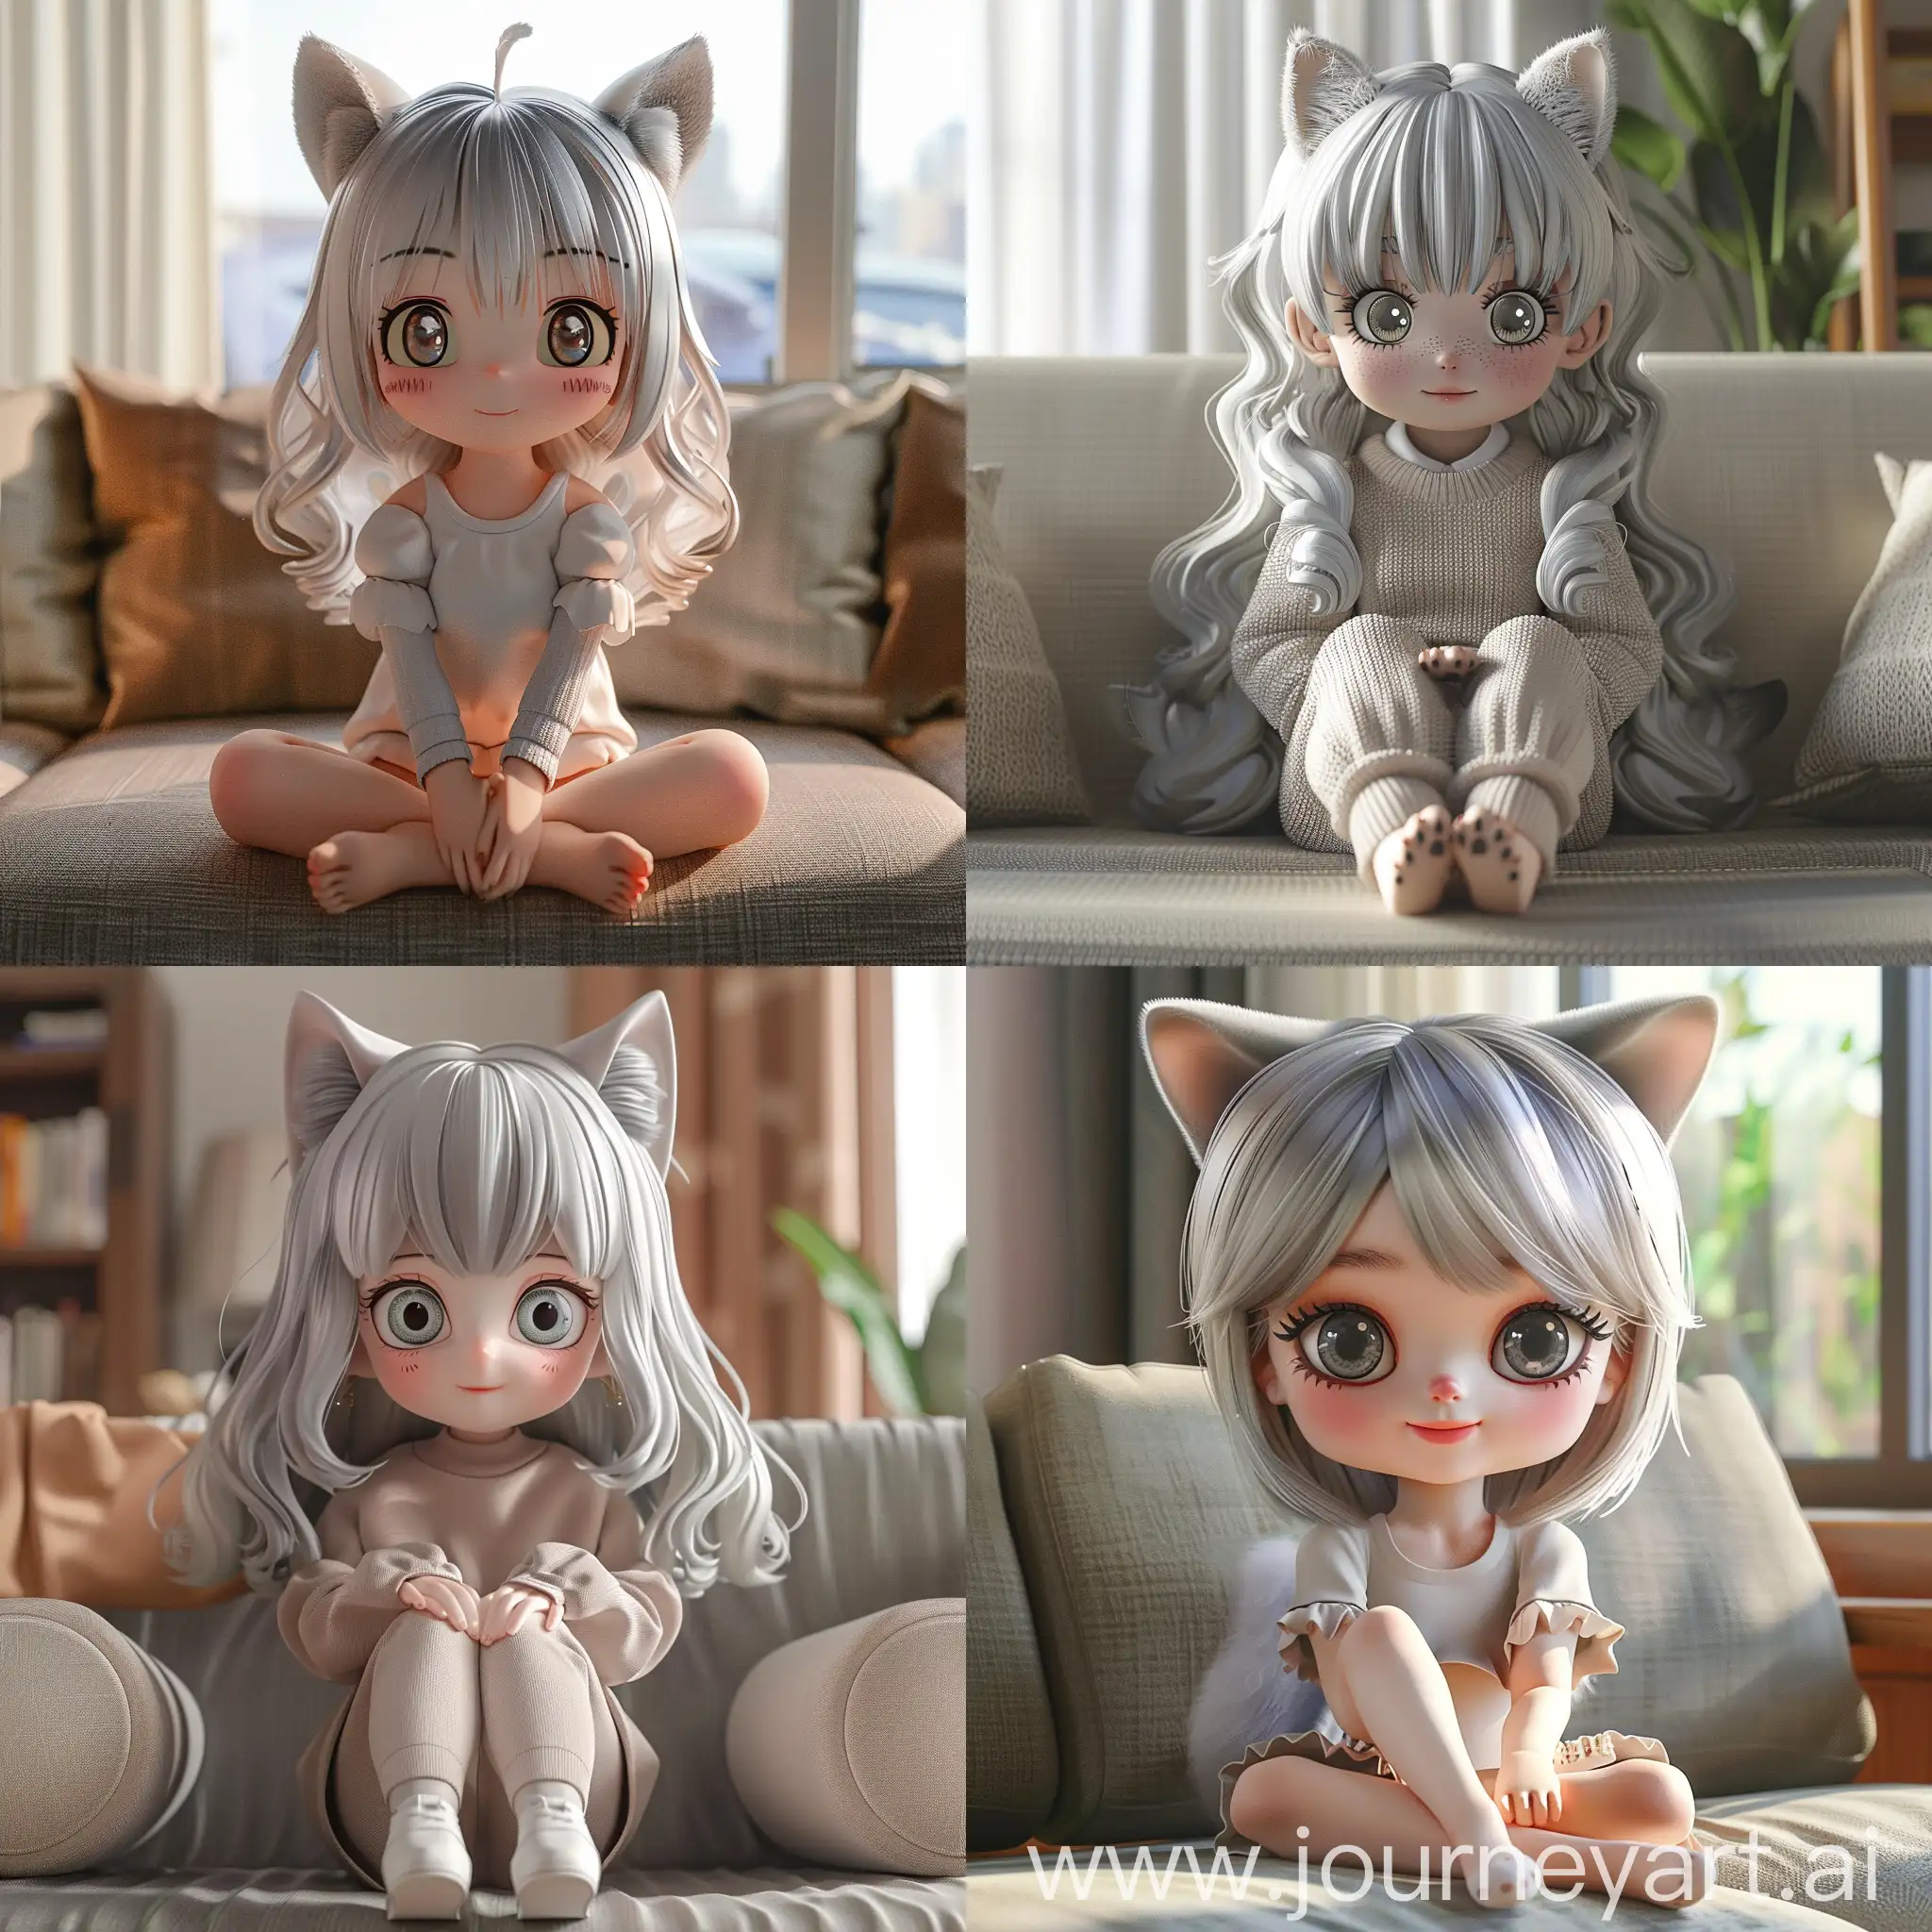 SilverHaired-CatEared-Girl-Sitting-on-Sofa-Super-Clear-and-Cute-Rendering